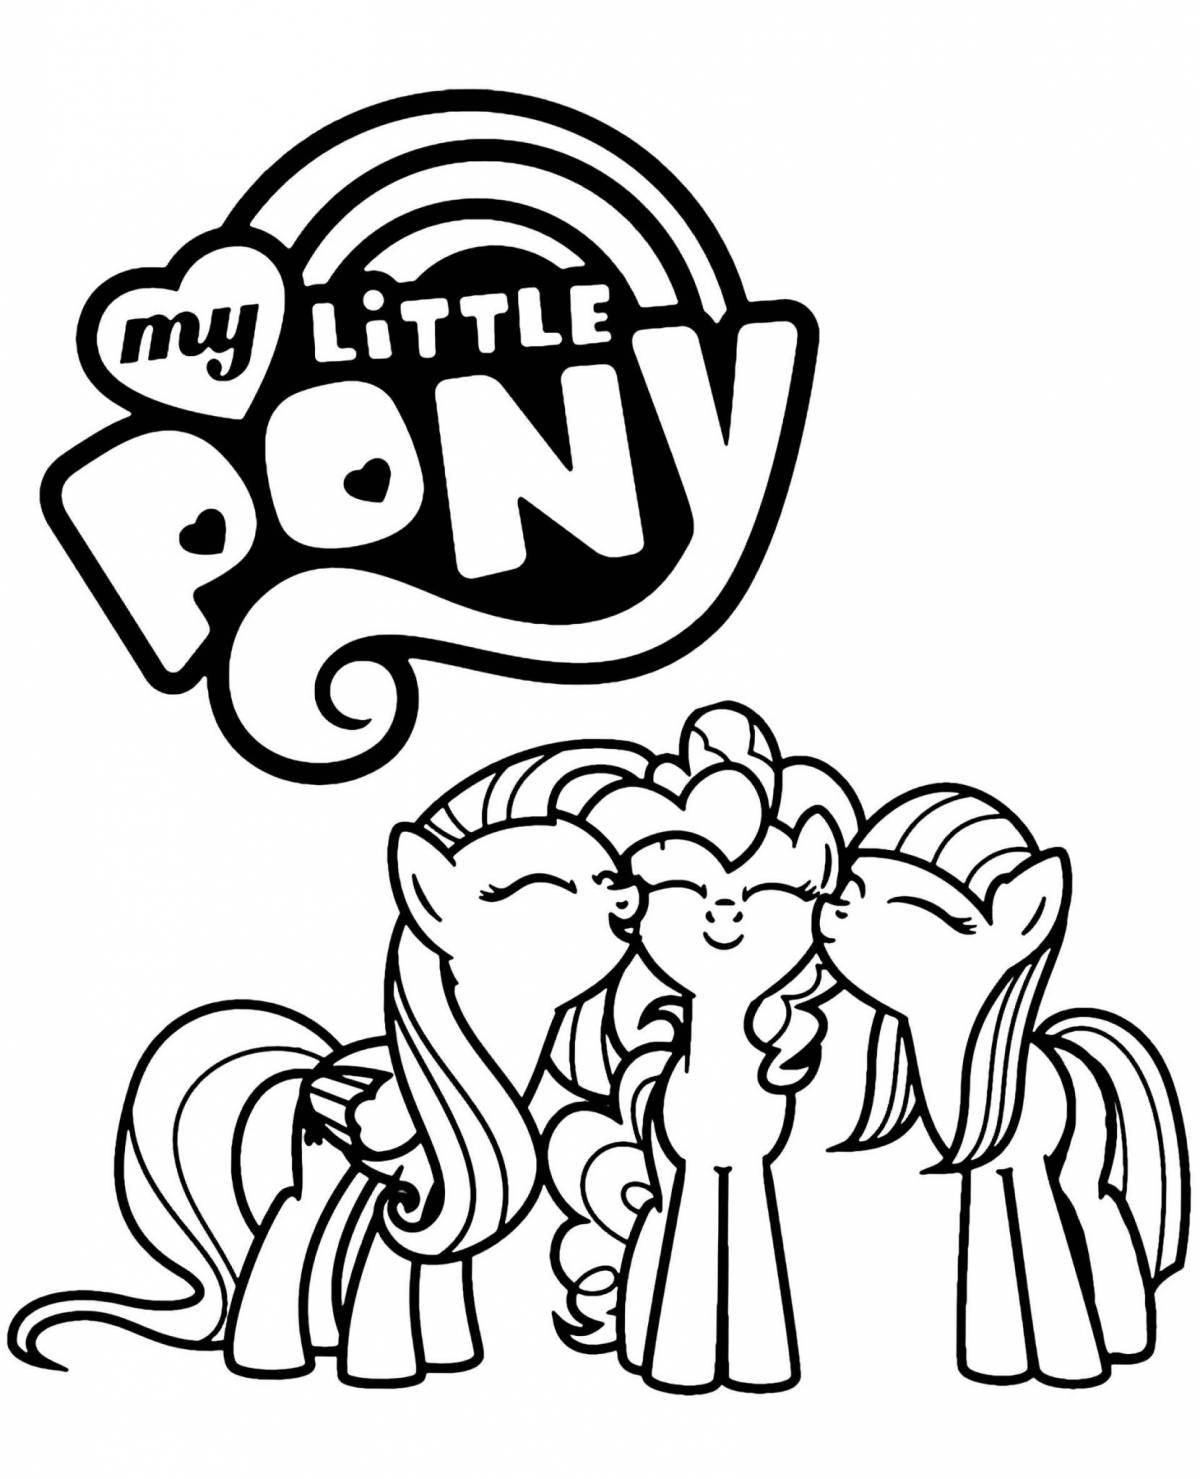 Coloring page wild life pony